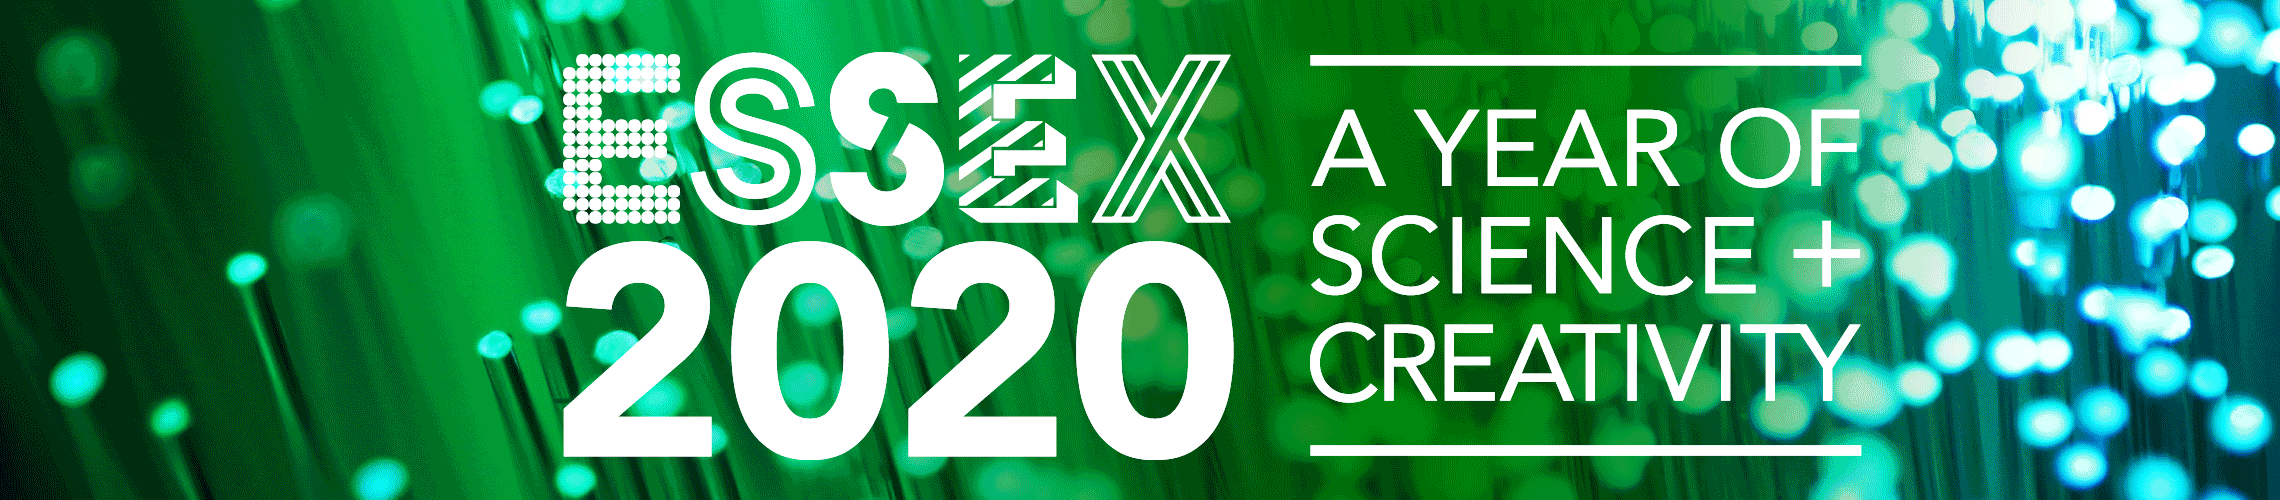 Essex 2020, a year of science and creativity, logo